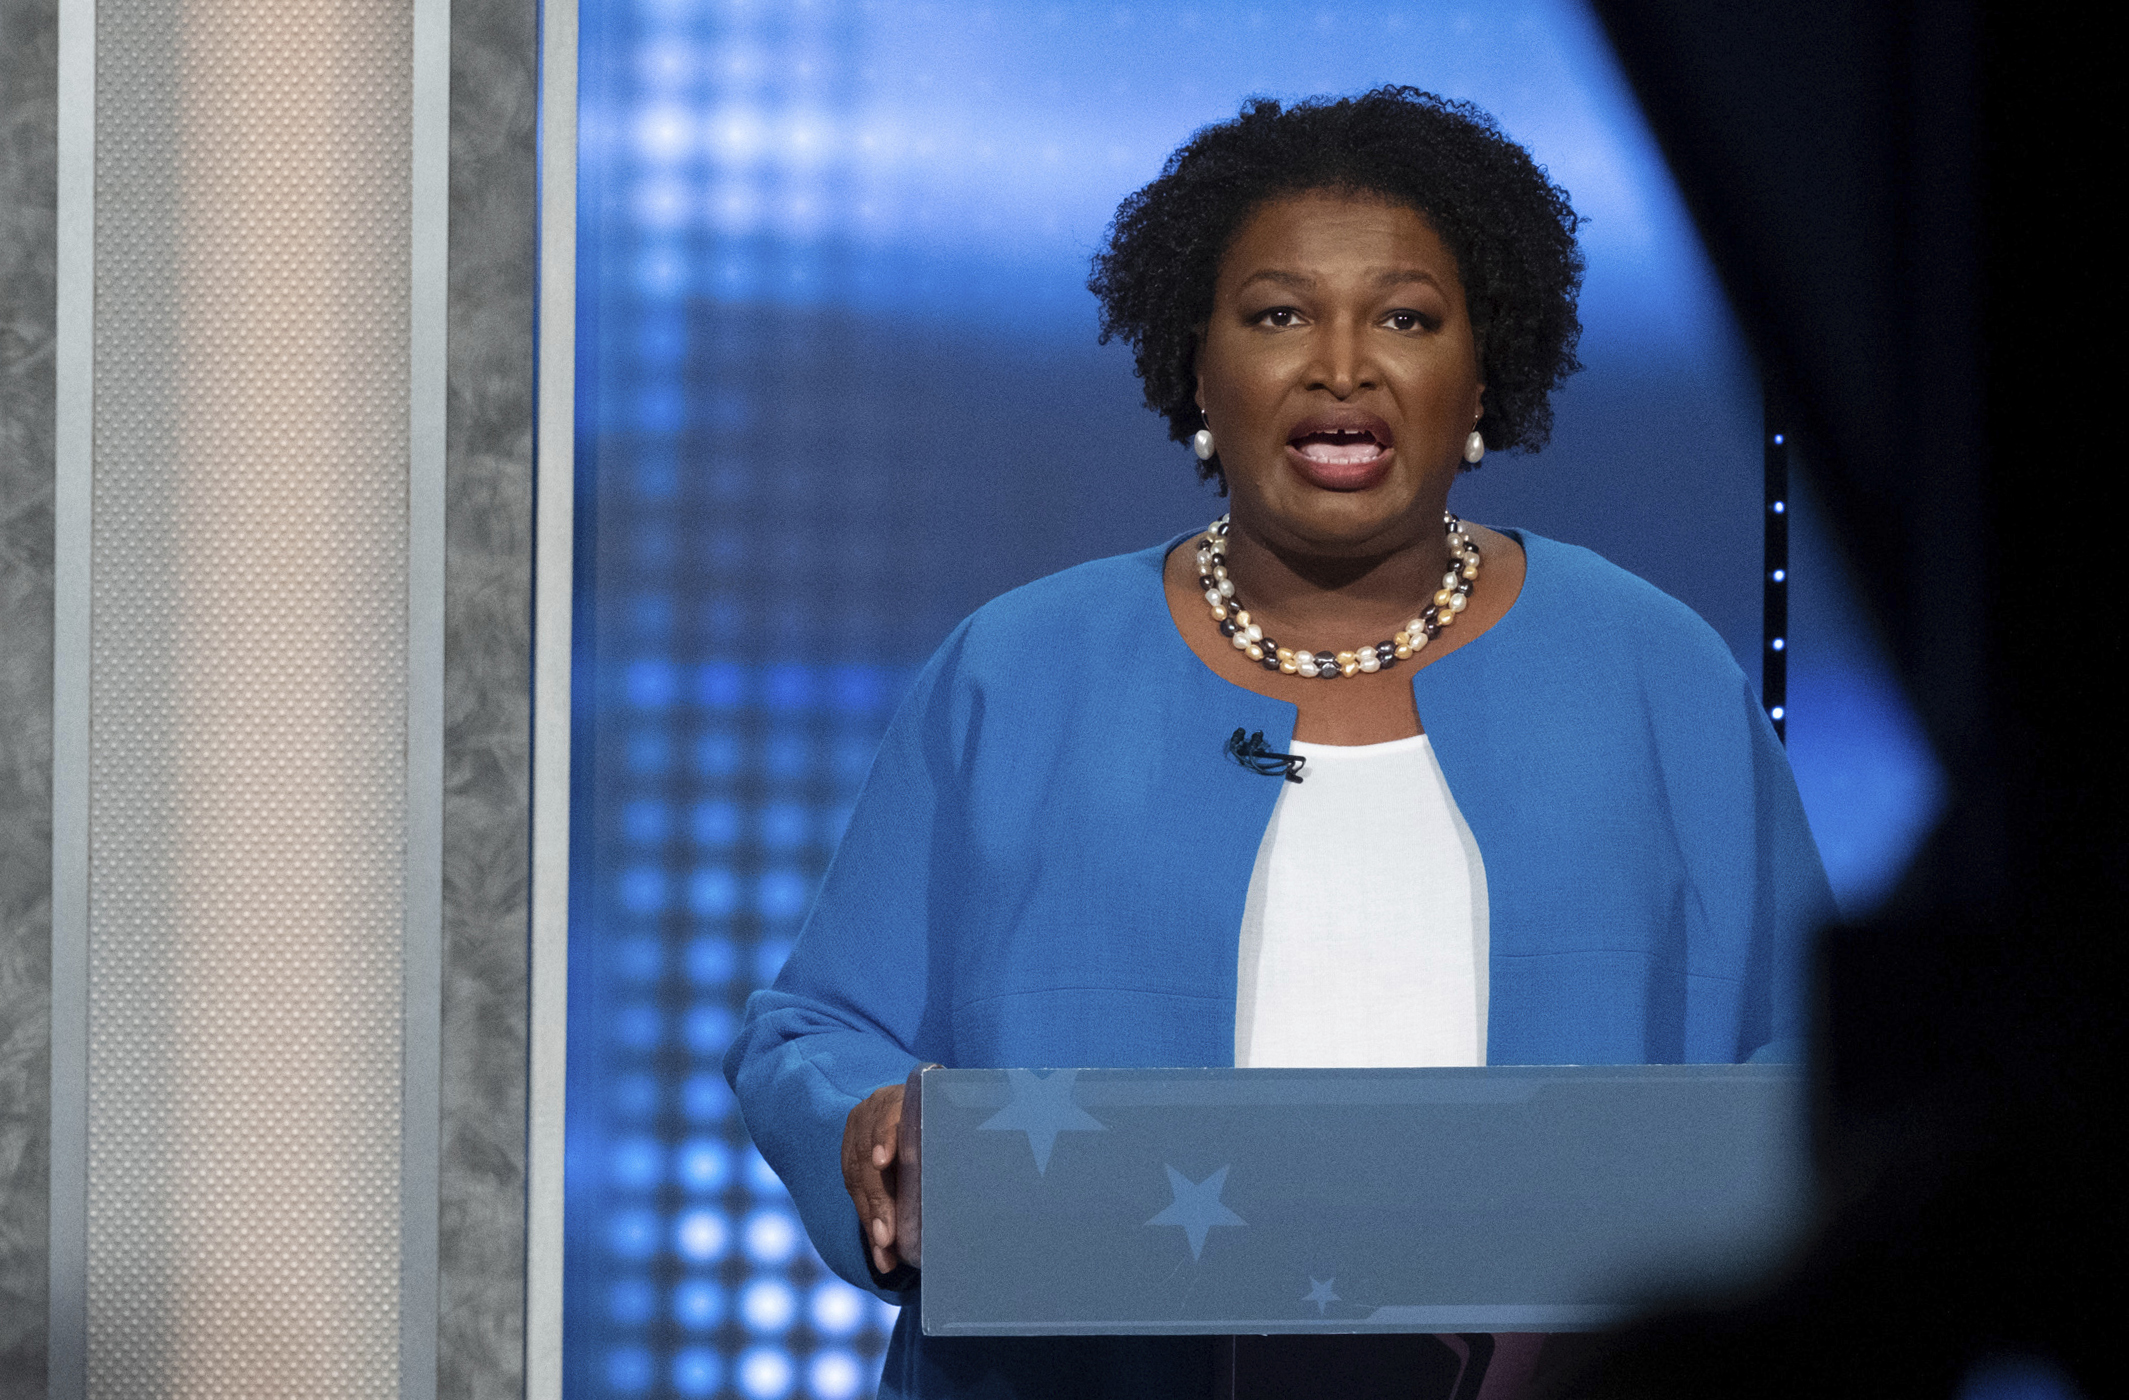 Democratic challenger Stacey Abrams speaks during the debate Sunday.